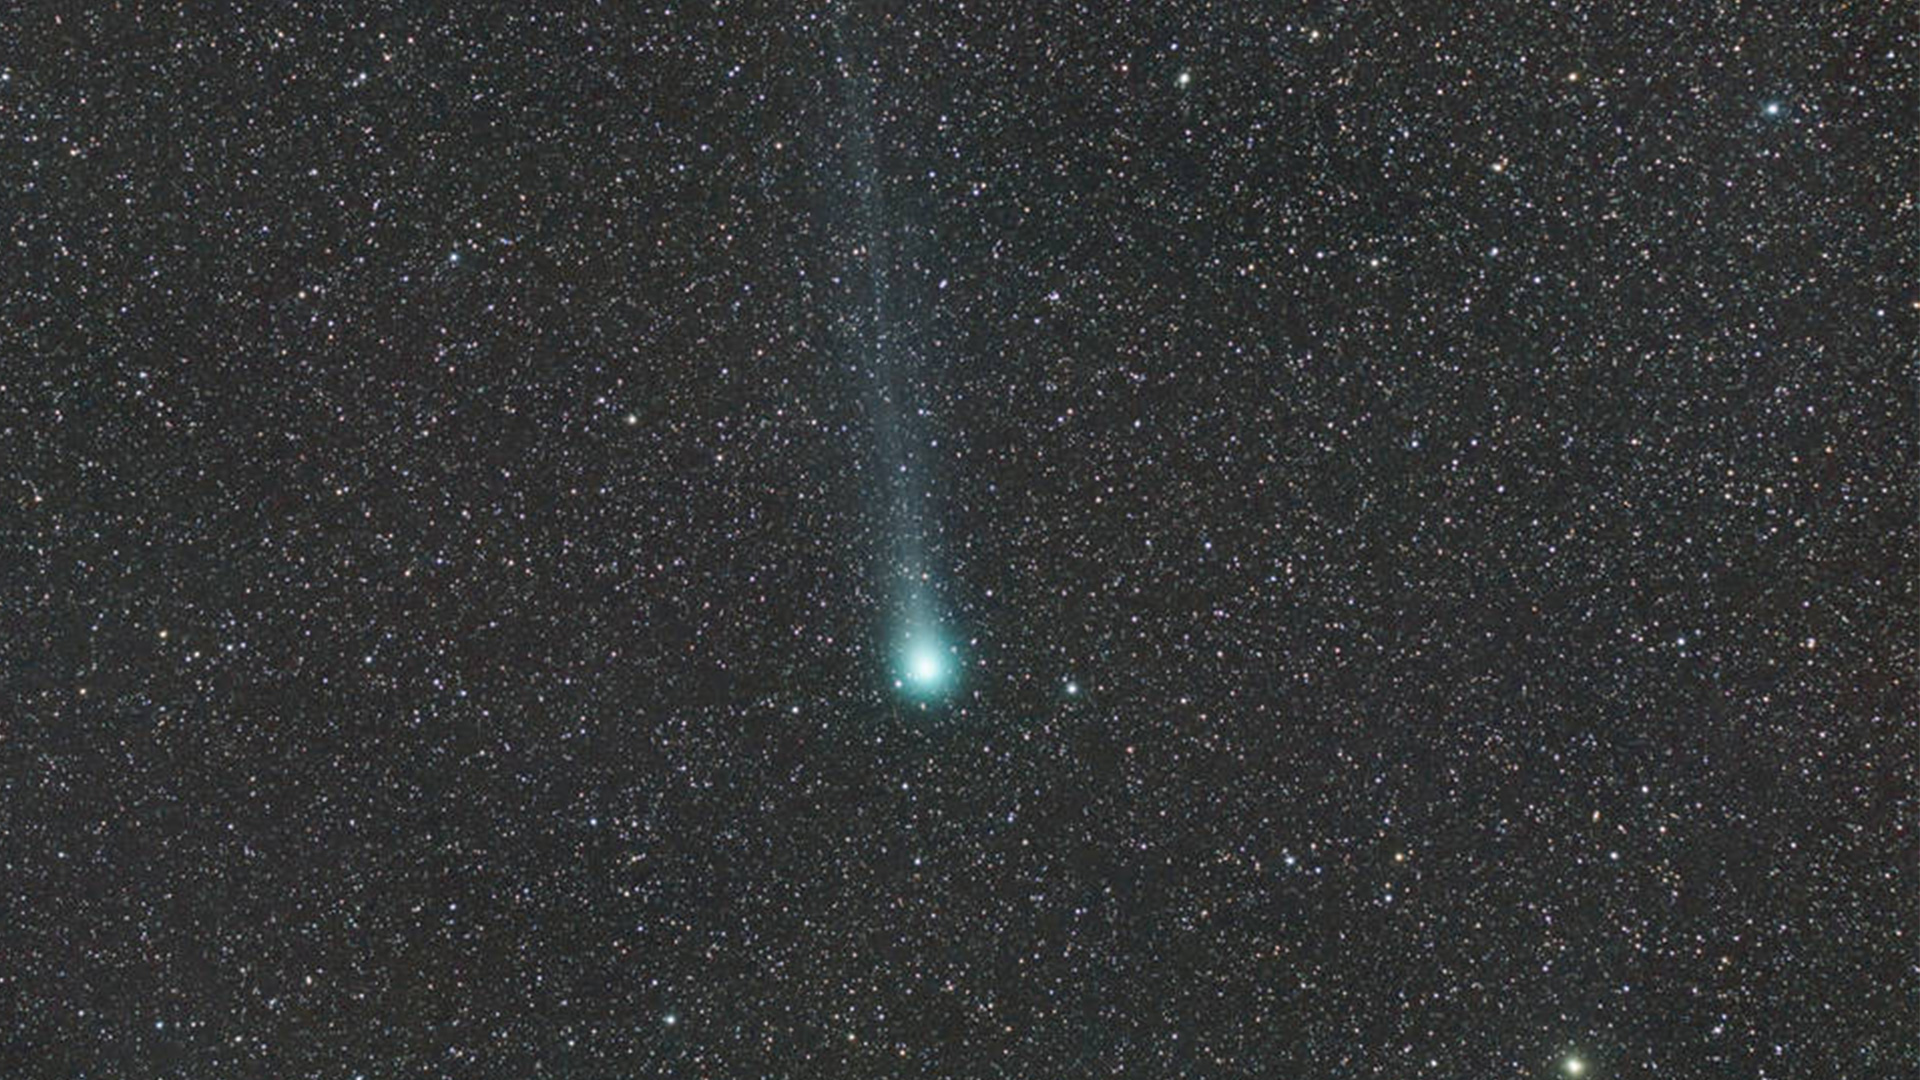 Giant ‘cosmic snowball’ K2 Comet receding in the sky but you can still spot the ‘megacomet’ this summer – here’s how